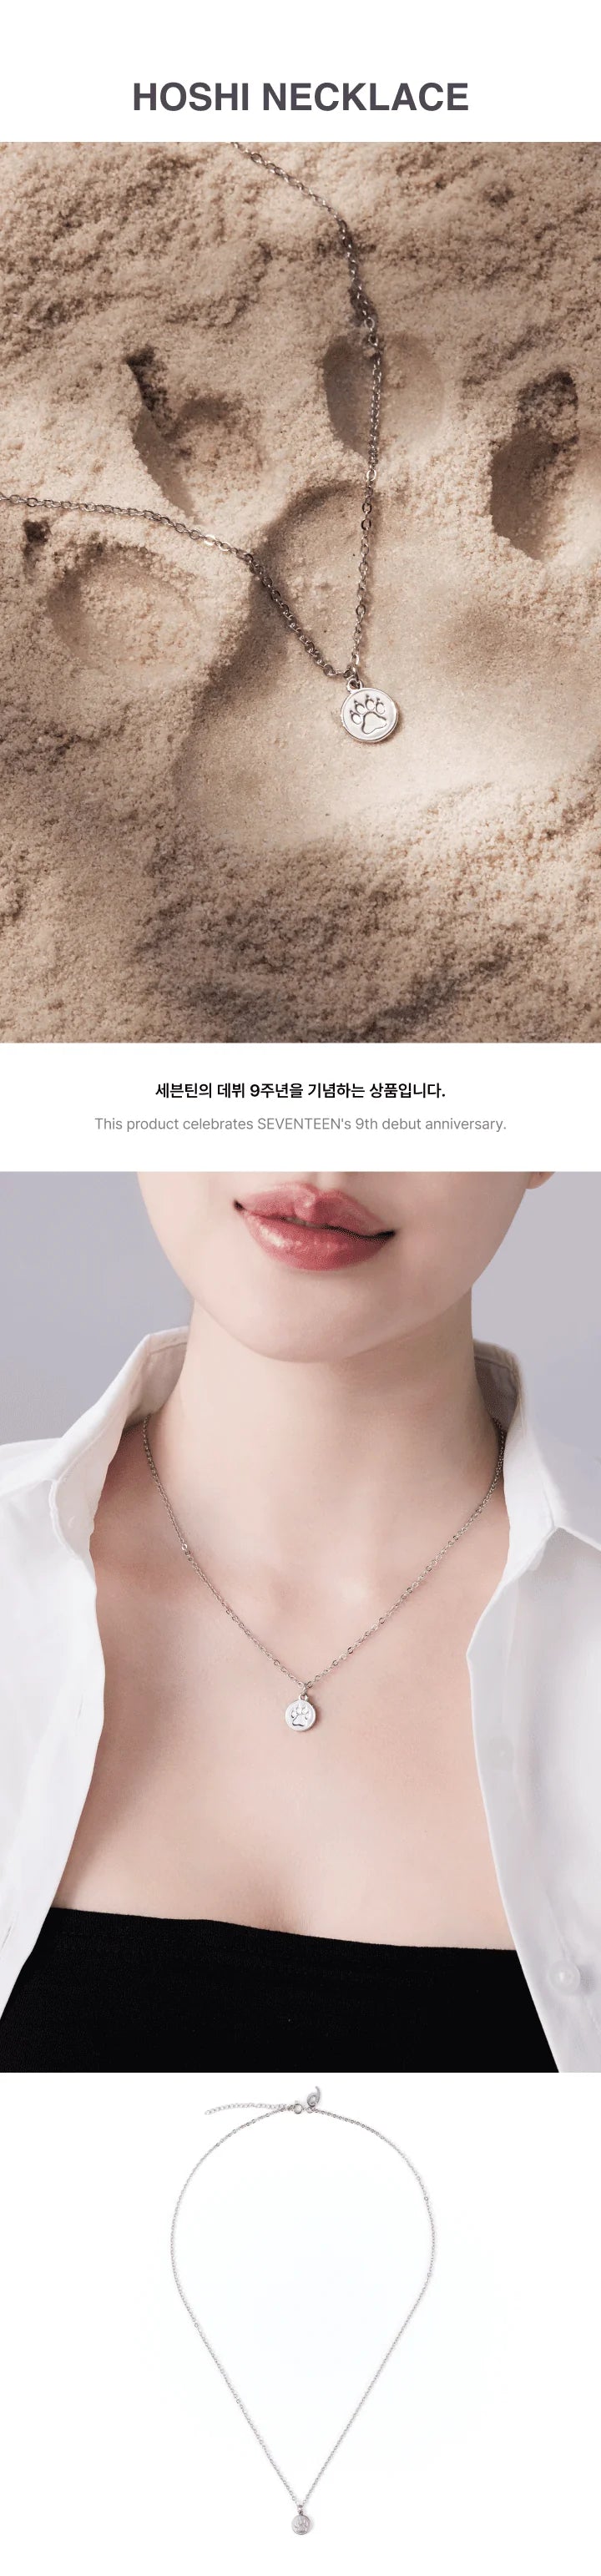 [PRE ORDER] SEVENTEEN - 9TH ANNIVERSARY (Official MD) / NECKLACE : HOSHI